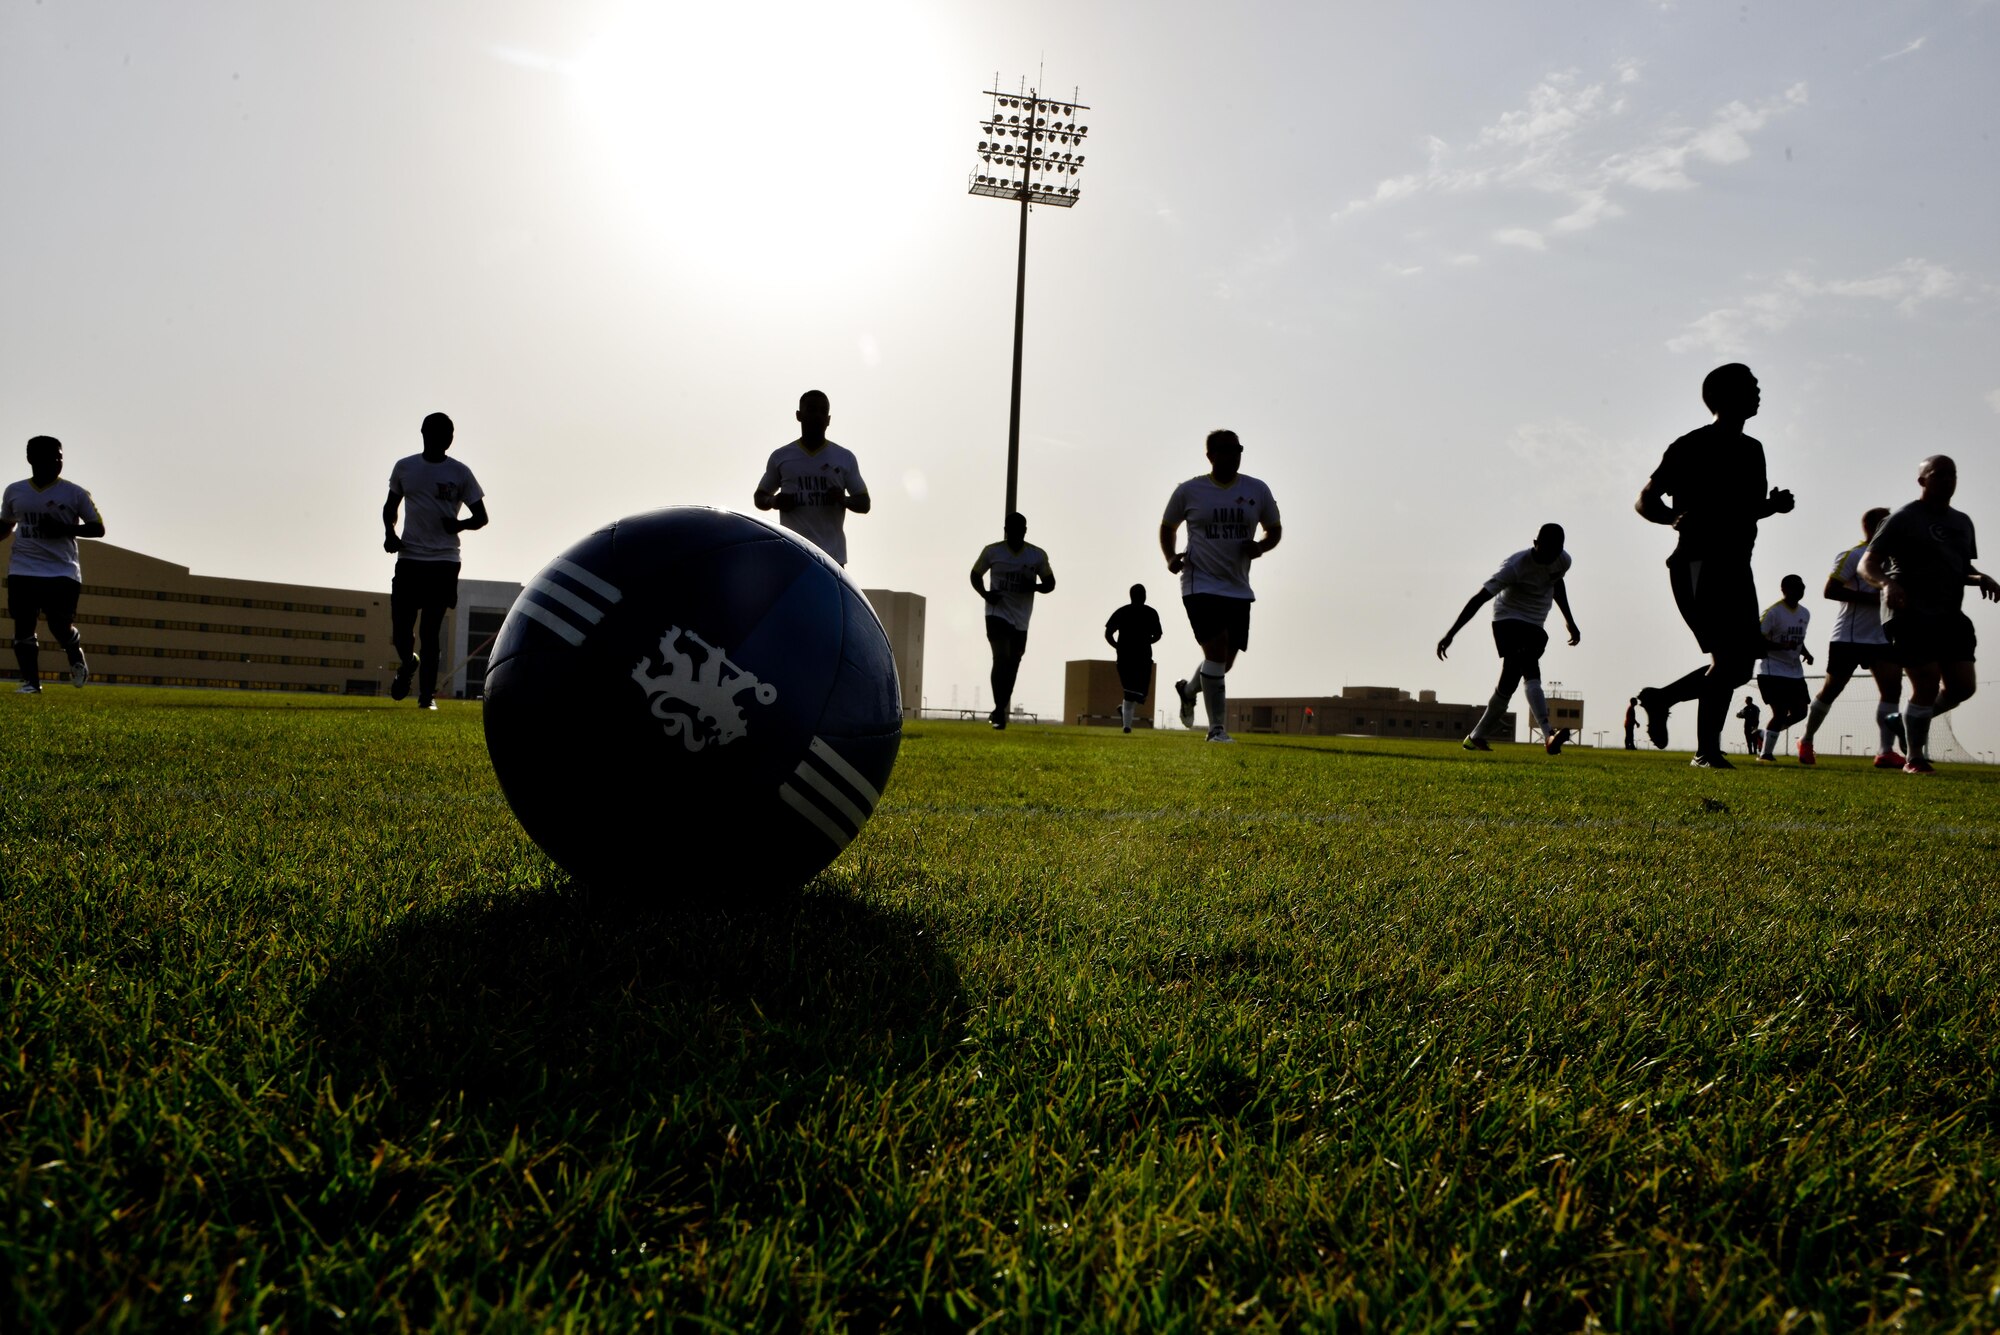 Members of the Al Udeid All-Stars conduct warm up exercises prior to a soccer match against Qatari military members in celebration of the 240th U.S.  Army birthday June 14, 2015 at Al Udeid Air Base, Qatar. AUAB All-Stars planned a soccer match to help strengthen the partnership between the U.S. and Qatari military and build friendships between service members. (U.S. Air Force photo/Staff Sgt. Alexandre Montes)